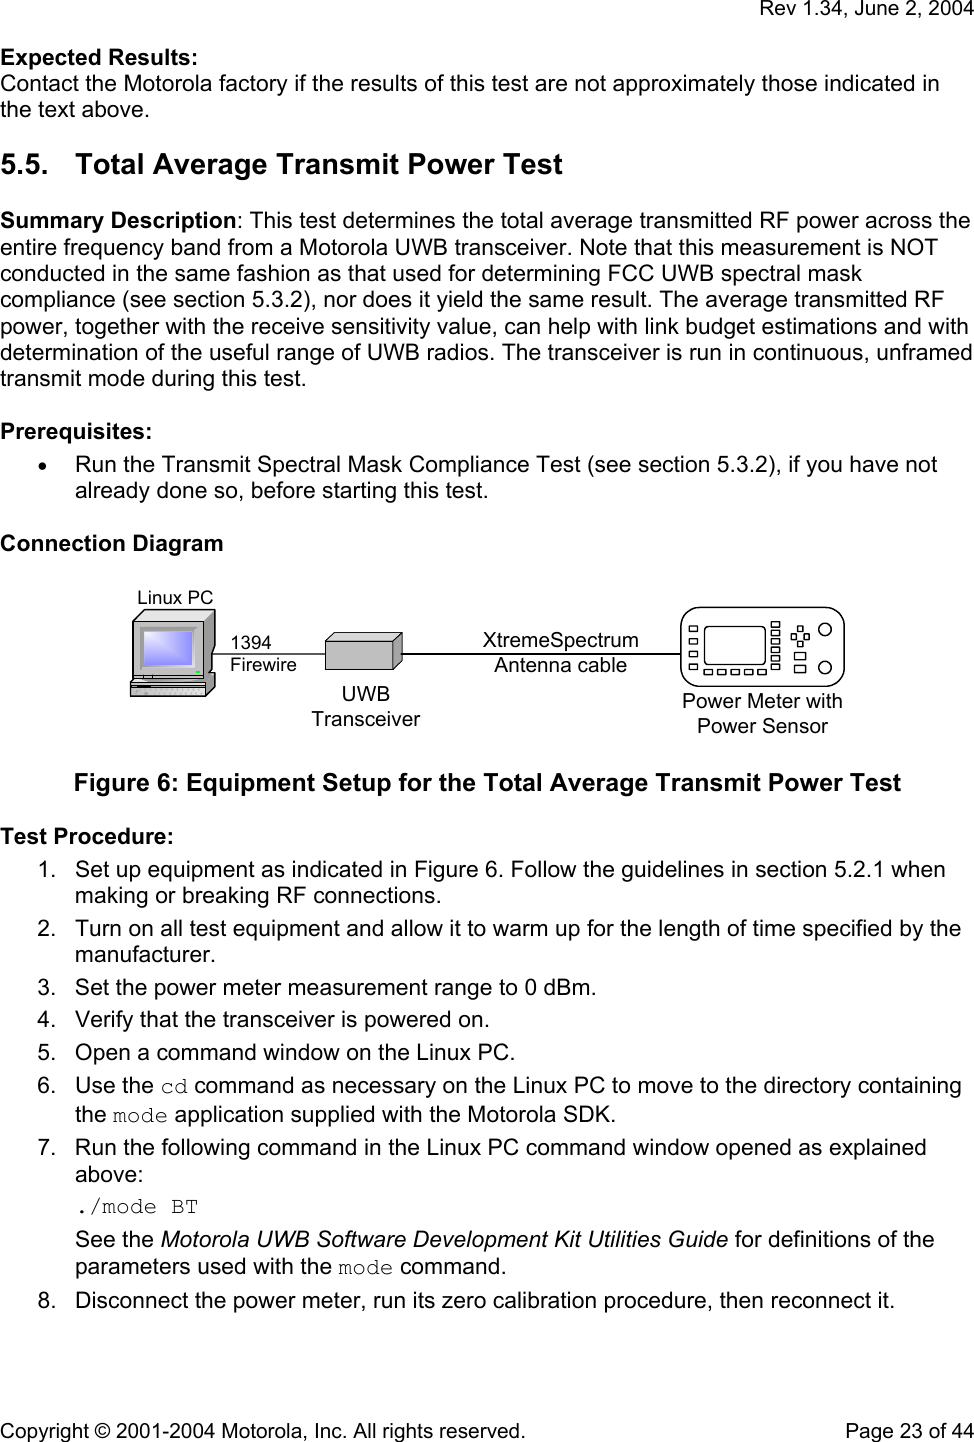   Rev 1.34, June 2, 2004  Copyright © 2001-2004 Motorola, Inc. All rights reserved.    Page 23 of 44 Expected Results: Contact the Motorola factory if the results of this test are not approximately those indicated in the text above. 5.5.  Total Average Transmit Power Test  Summary Description: This test determines the total average transmitted RF power across the entire frequency band from a Motorola UWB transceiver. Note that this measurement is NOT conducted in the same fashion as that used for determining FCC UWB spectral mask compliance (see section 5.3.2), nor does it yield the same result. The average transmitted RF power, together with the receive sensitivity value, can help with link budget estimations and with determination of the useful range of UWB radios. The transceiver is run in continuous, unframed transmit mode during this test.  Prerequisites: • Run the Transmit Spectral Mask Compliance Test (see section 5.3.2), if you have not already done so, before starting this test.  Connection Diagram  Power Meter withPower SensorLinux PC1394FirewireUWBTransceiverXtremeSpectrumAntenna cable  Figure 6: Equipment Setup for the Total Average Transmit Power Test  Test Procedure: 1.  Set up equipment as indicated in Figure 6. Follow the guidelines in section 5.2.1 when making or breaking RF connections. 2.  Turn on all test equipment and allow it to warm up for the length of time specified by the manufacturer. 3.  Set the power meter measurement range to 0 dBm. 4.  Verify that the transceiver is powered on. 5.  Open a command window on the Linux PC. 6. Use the cd command as necessary on the Linux PC to move to the directory containing the mode application supplied with the Motorola SDK. 7.  Run the following command in the Linux PC command window opened as explained above: ./mode BT See the Motorola UWB Software Development Kit Utilities Guide for definitions of the parameters used with the mode command.  8.  Disconnect the power meter, run its zero calibration procedure, then reconnect it. 